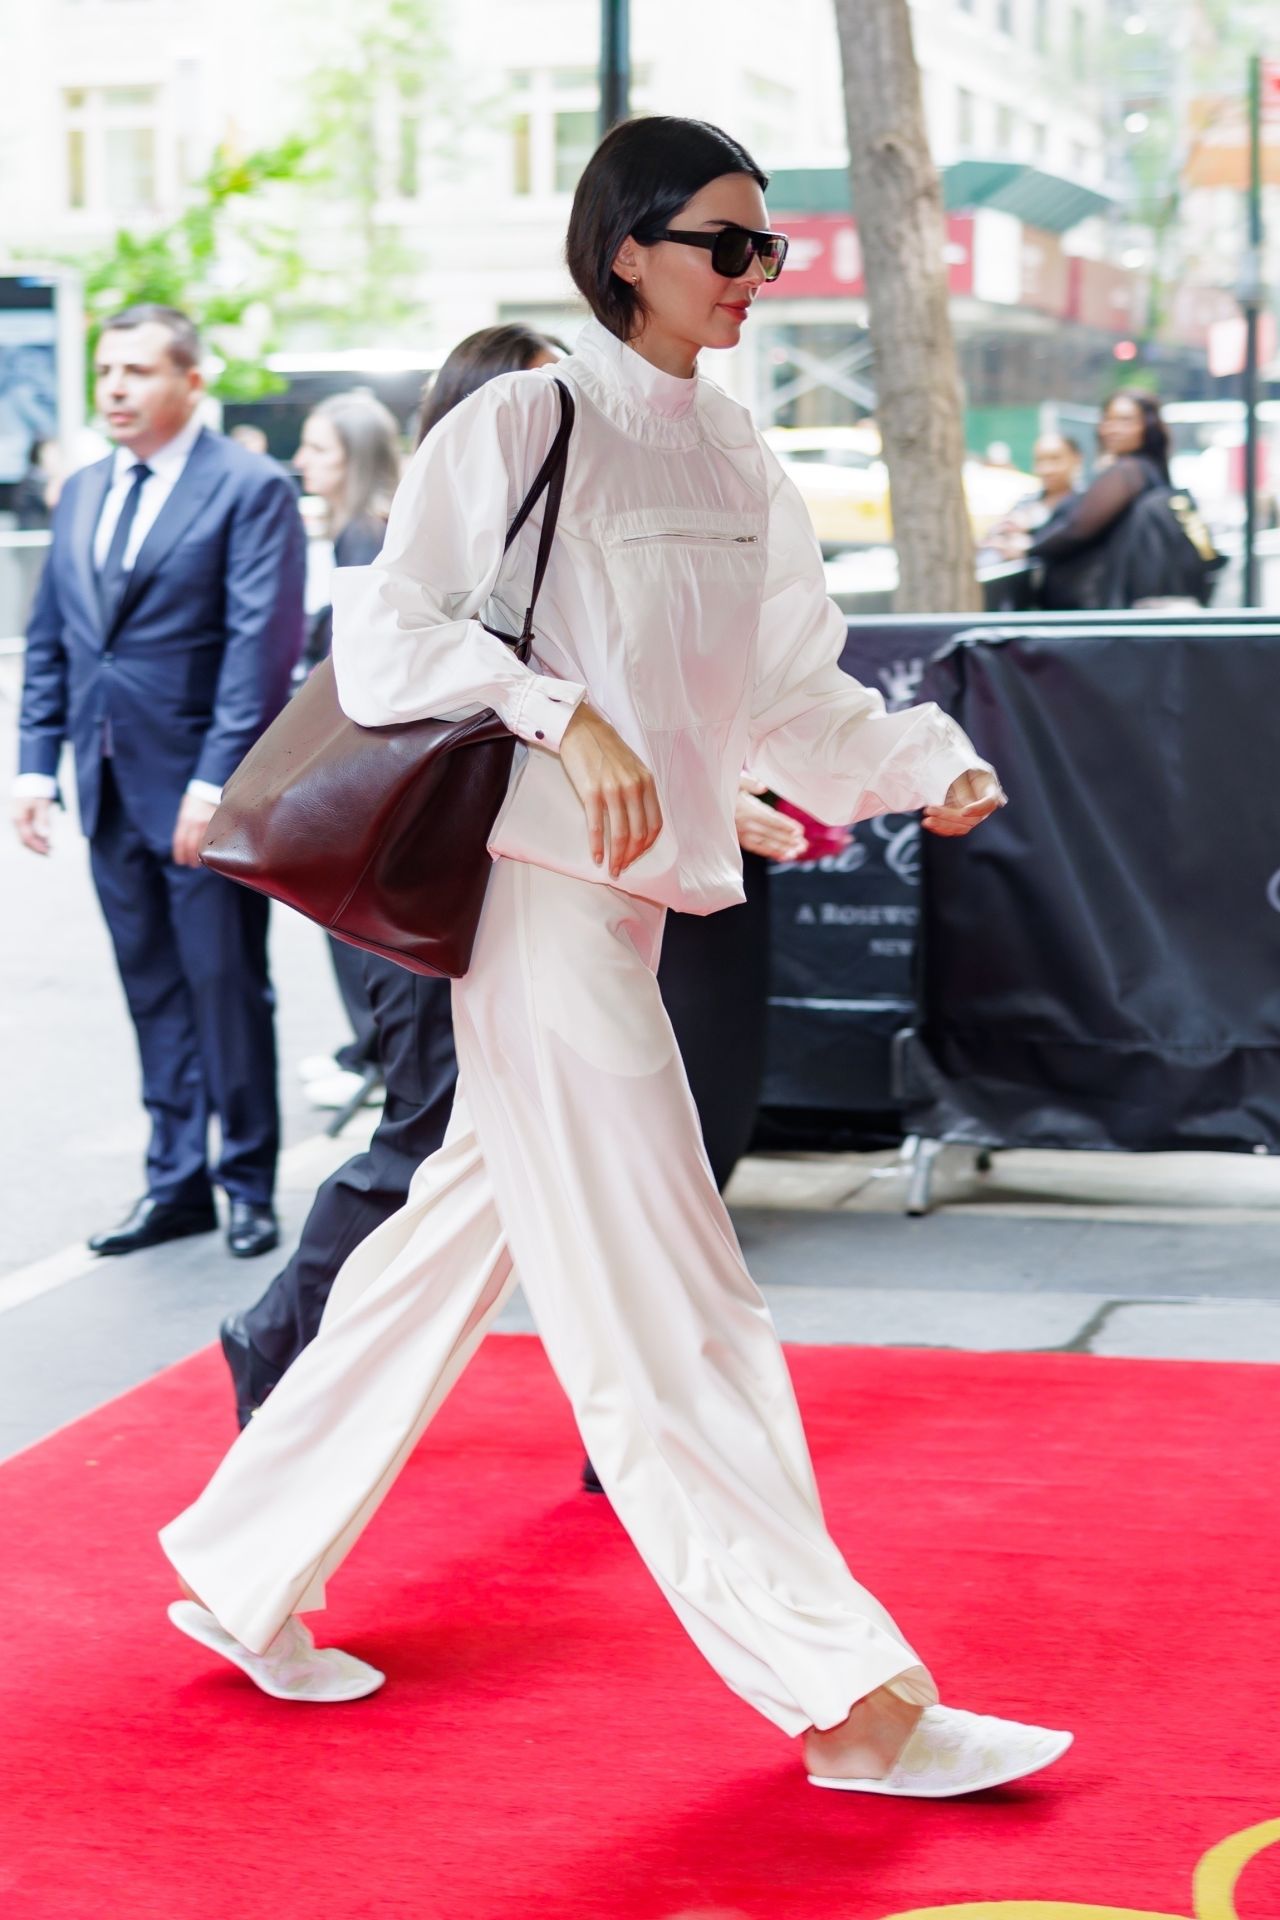 KENDALL JENNER ARRIVING AT CARLYLE HOTEL IN NEW YORK